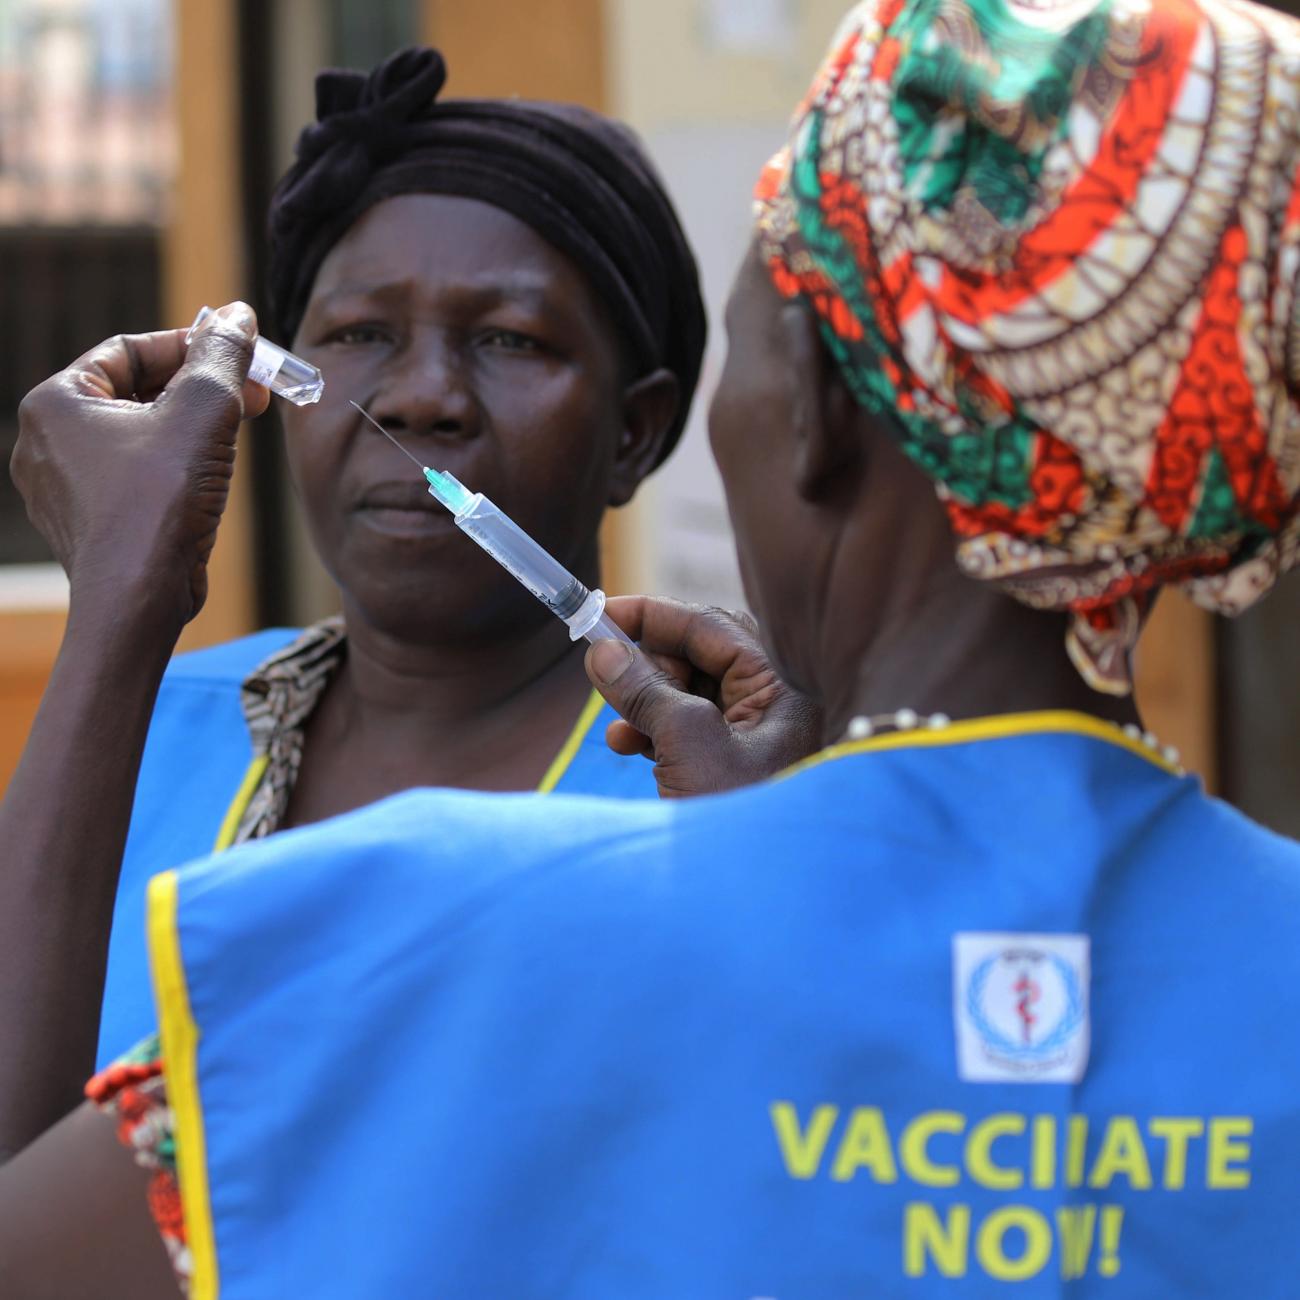 South Sudanese health workers prepare to administer vaccines during a campaign in Juba, South Sudan, on February 4, 2020.